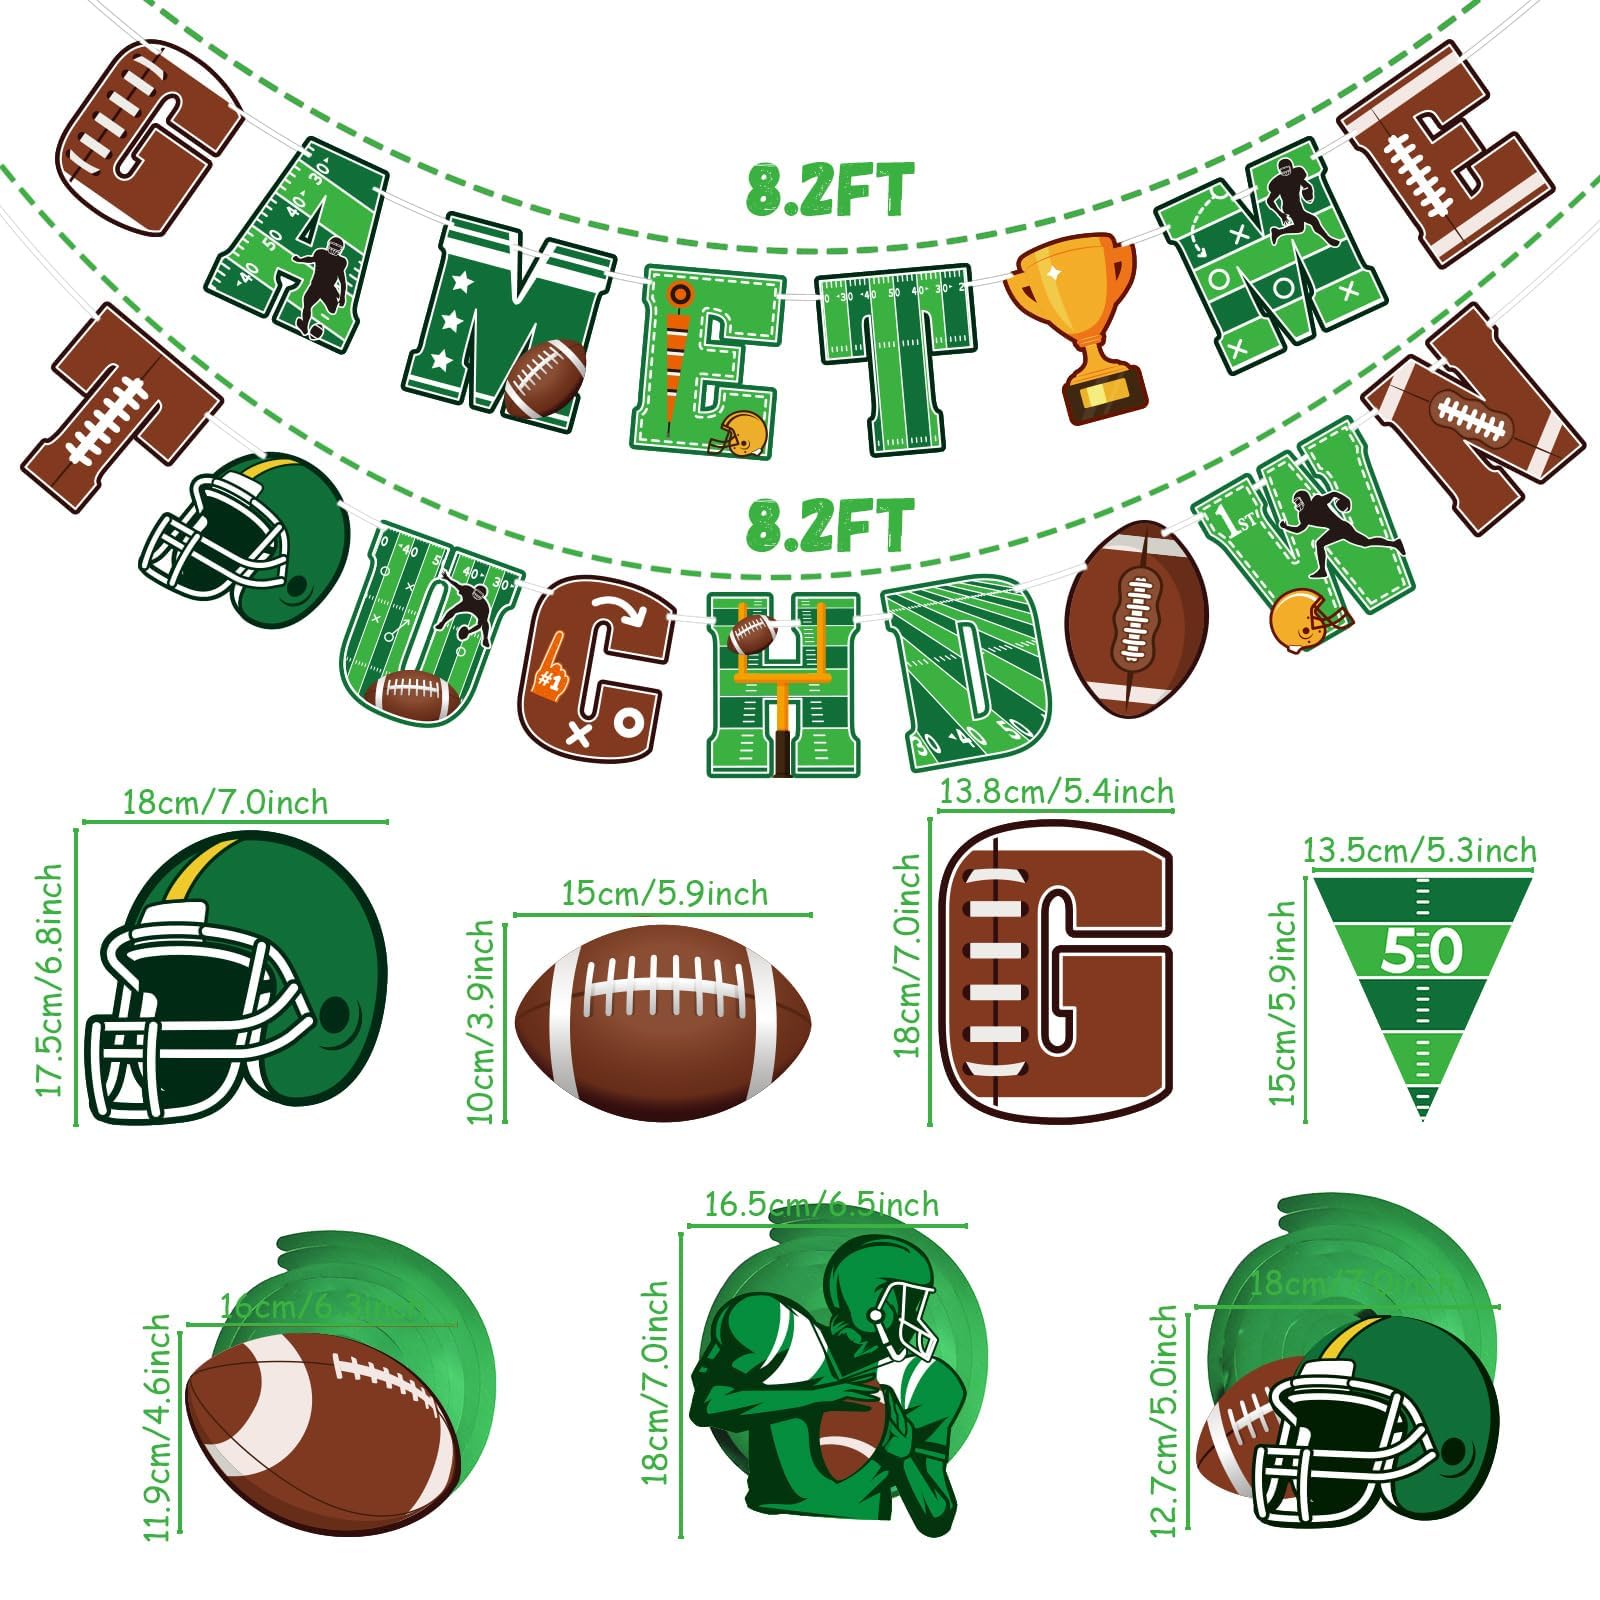 Football Hanging Swirl Decorations Football Birthday Banner Supplies Include Touch Down Game Time Pennant Banner Hanging Spirals for Sport Tailgate Game Day Party